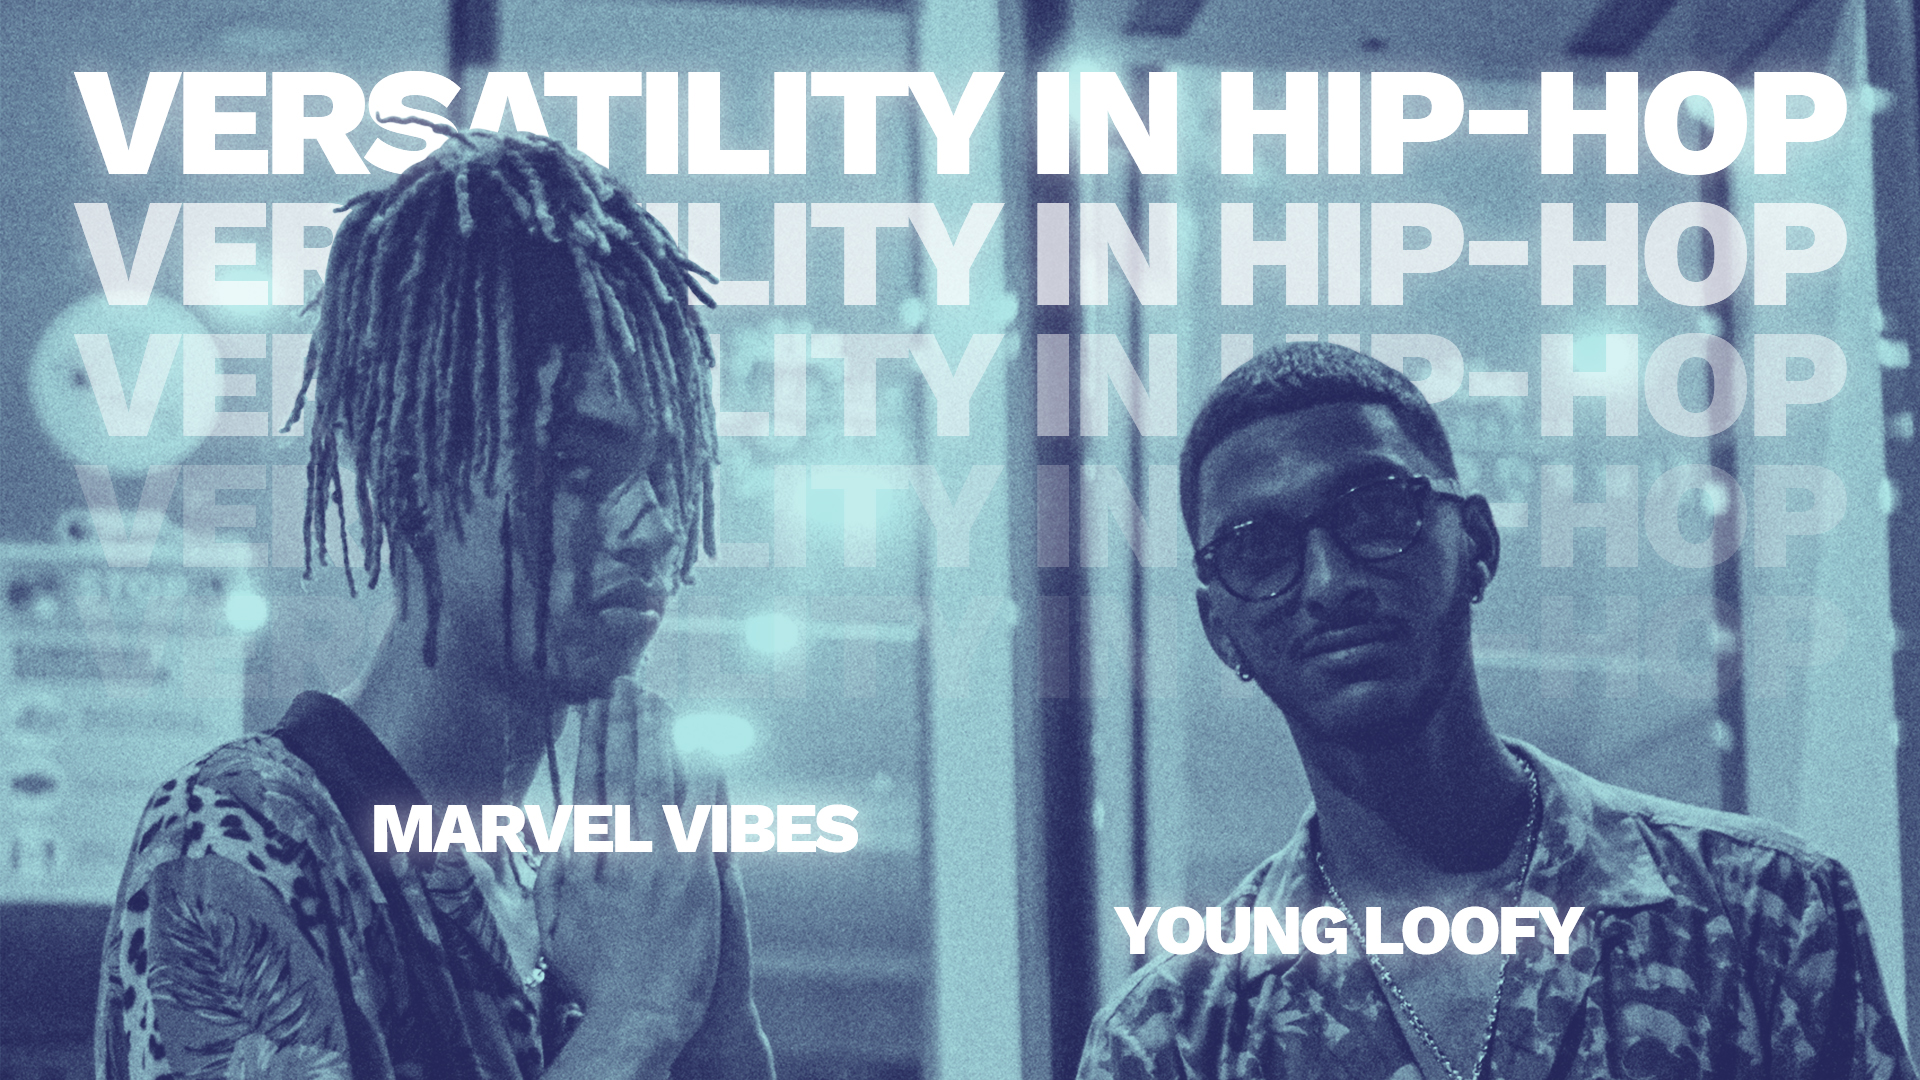 You are currently viewing Versatility in Hip-Hop FT. Marvel Vibes X Young Loofy